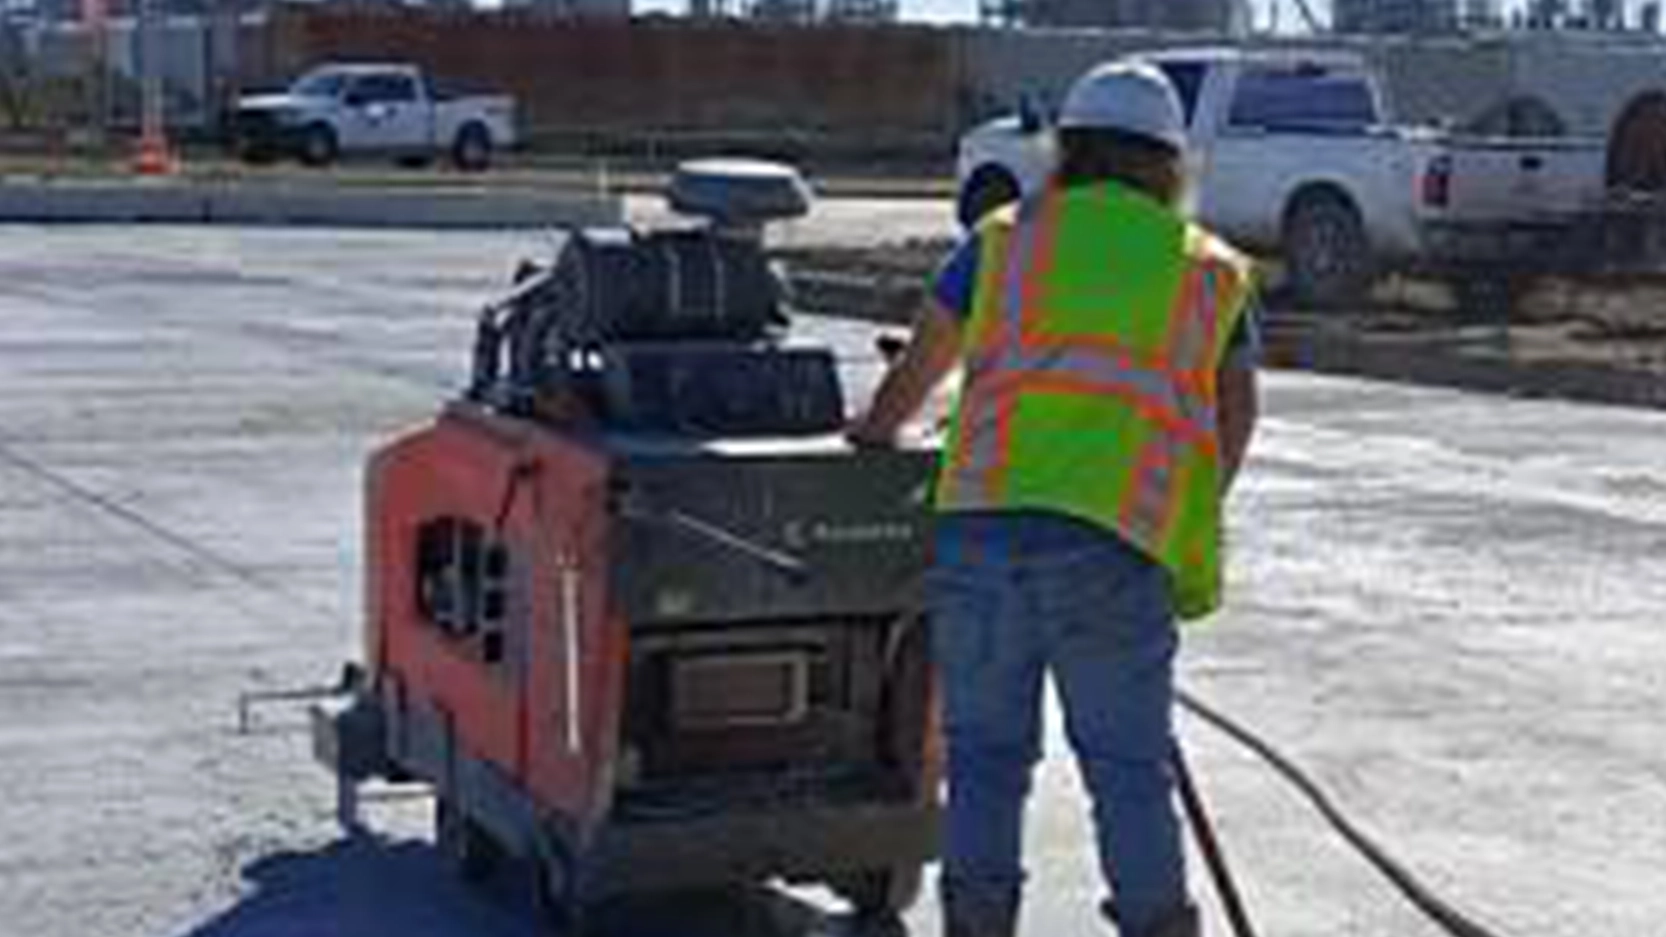 Workman sawing concrete with machine